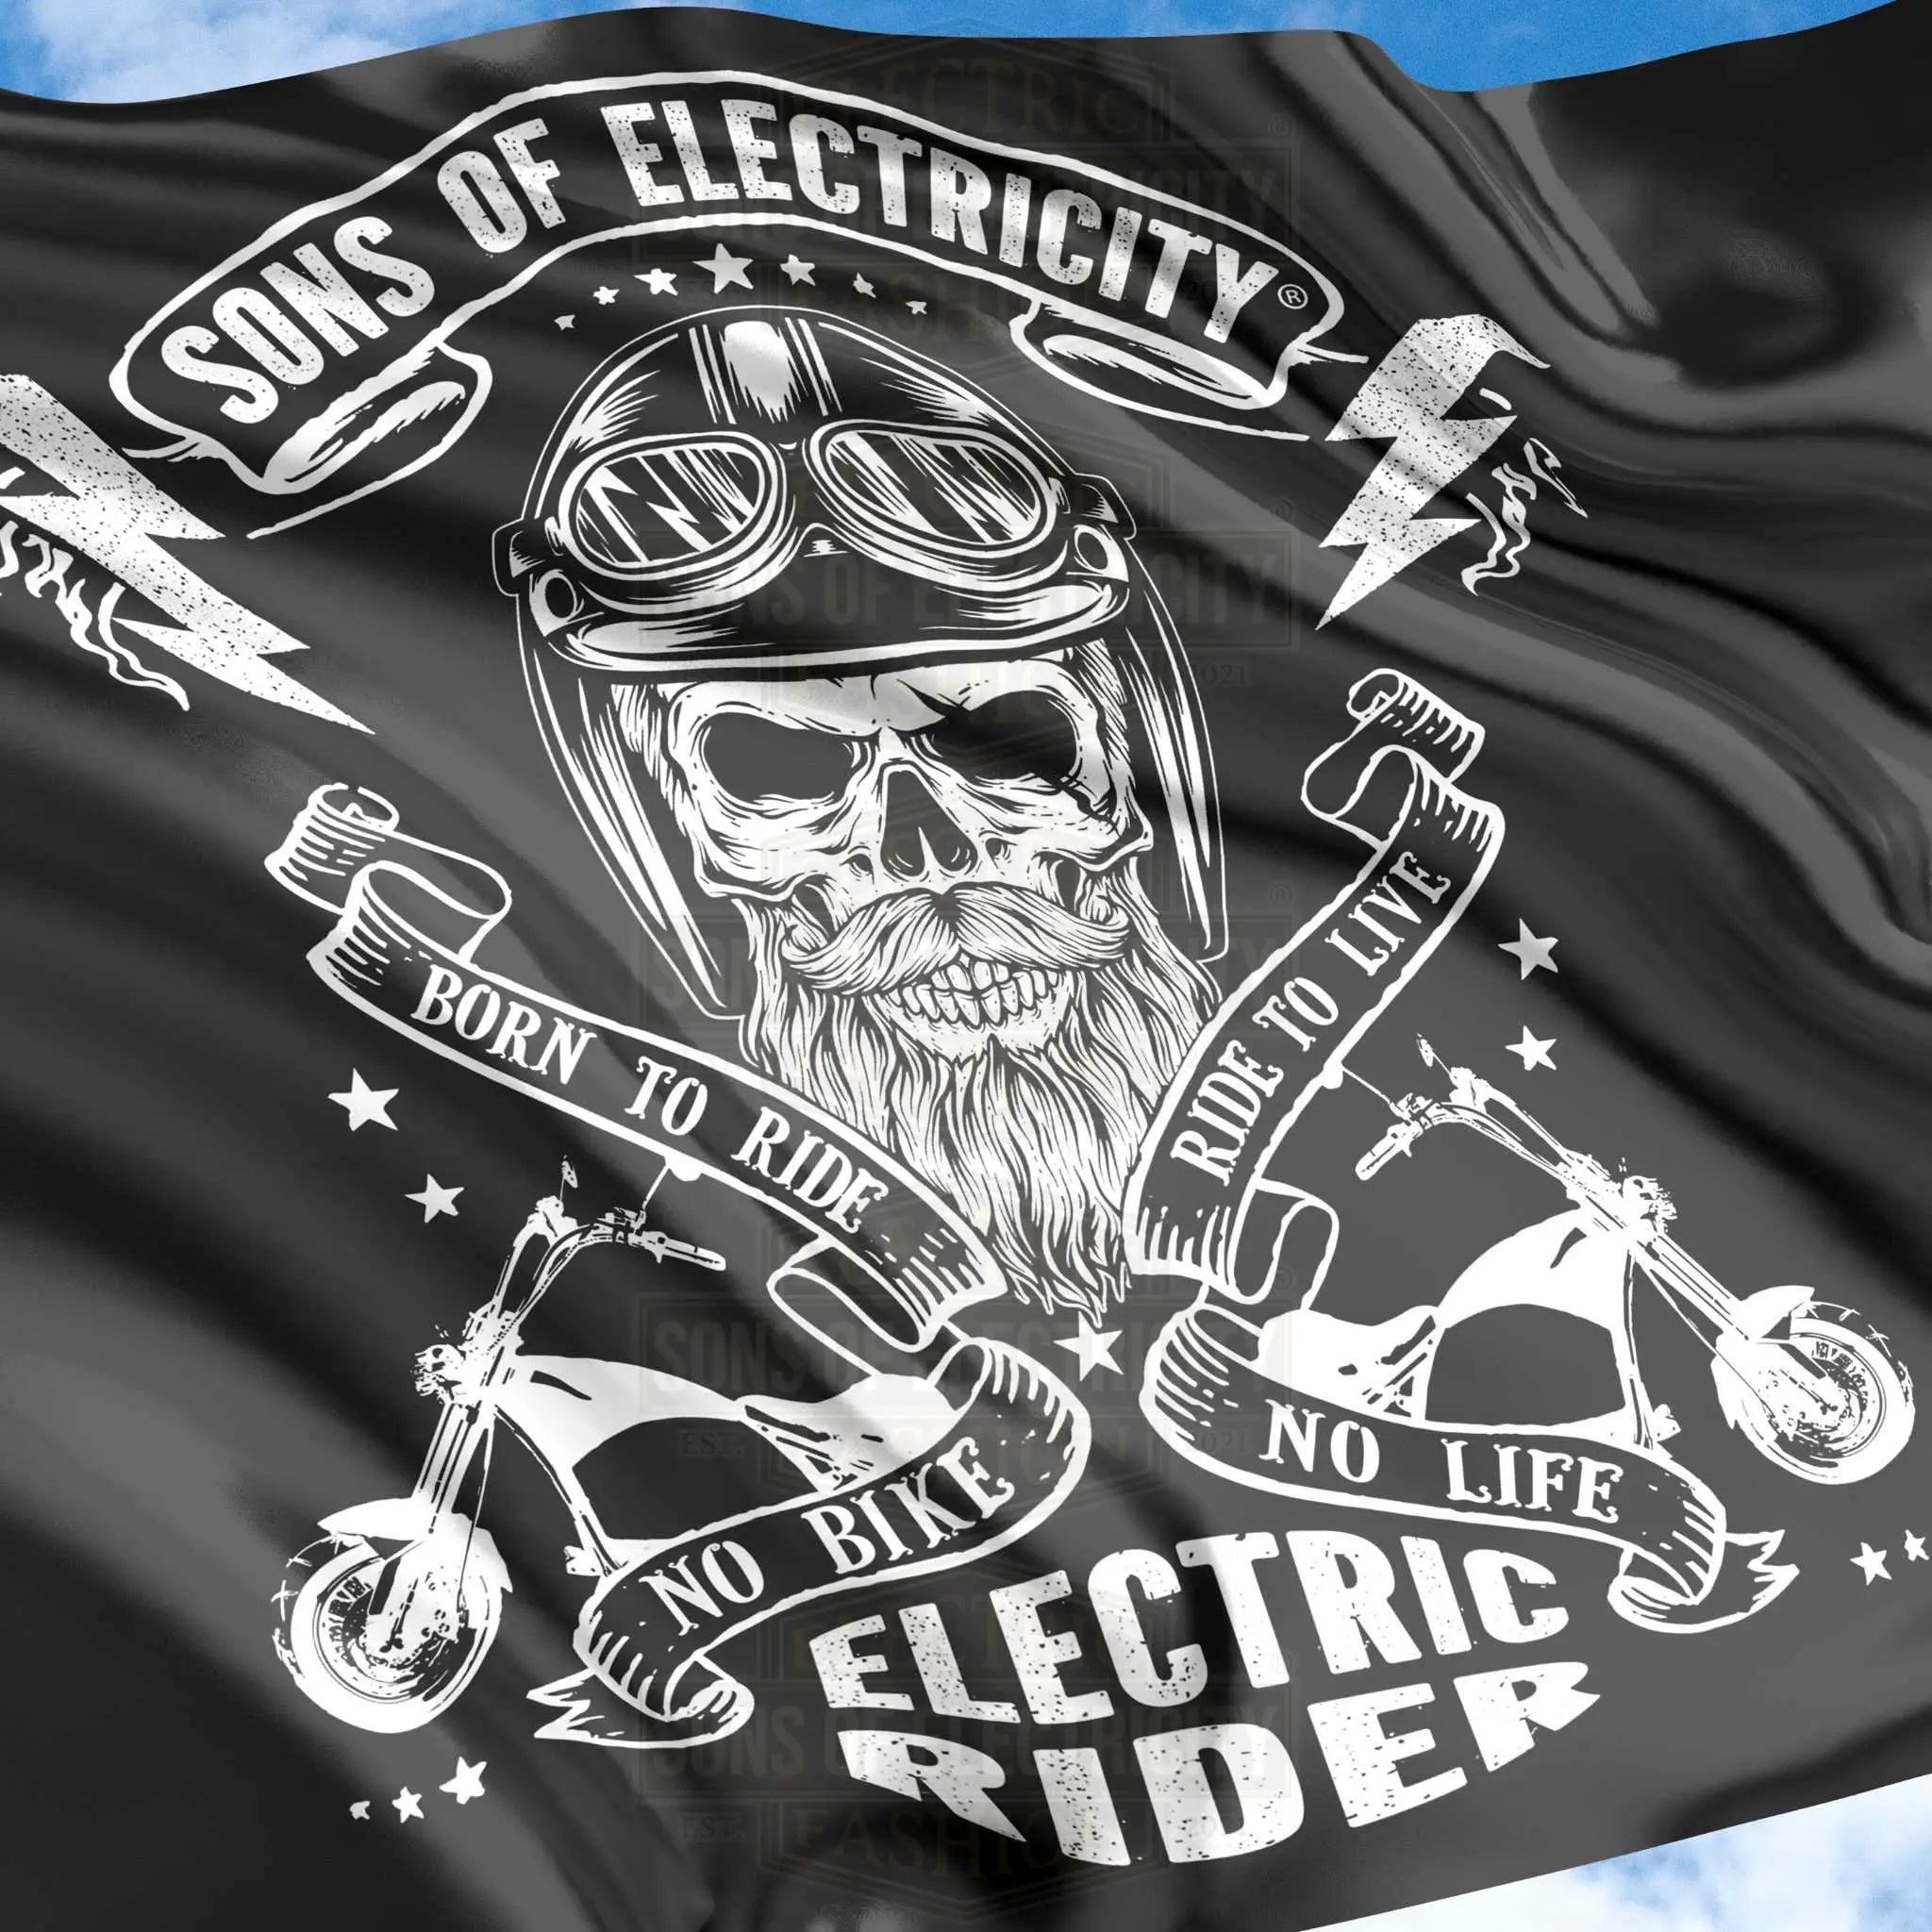 SONS OF ELECTRICITY Hiss-Fahne - E-Chopper (1) Electric